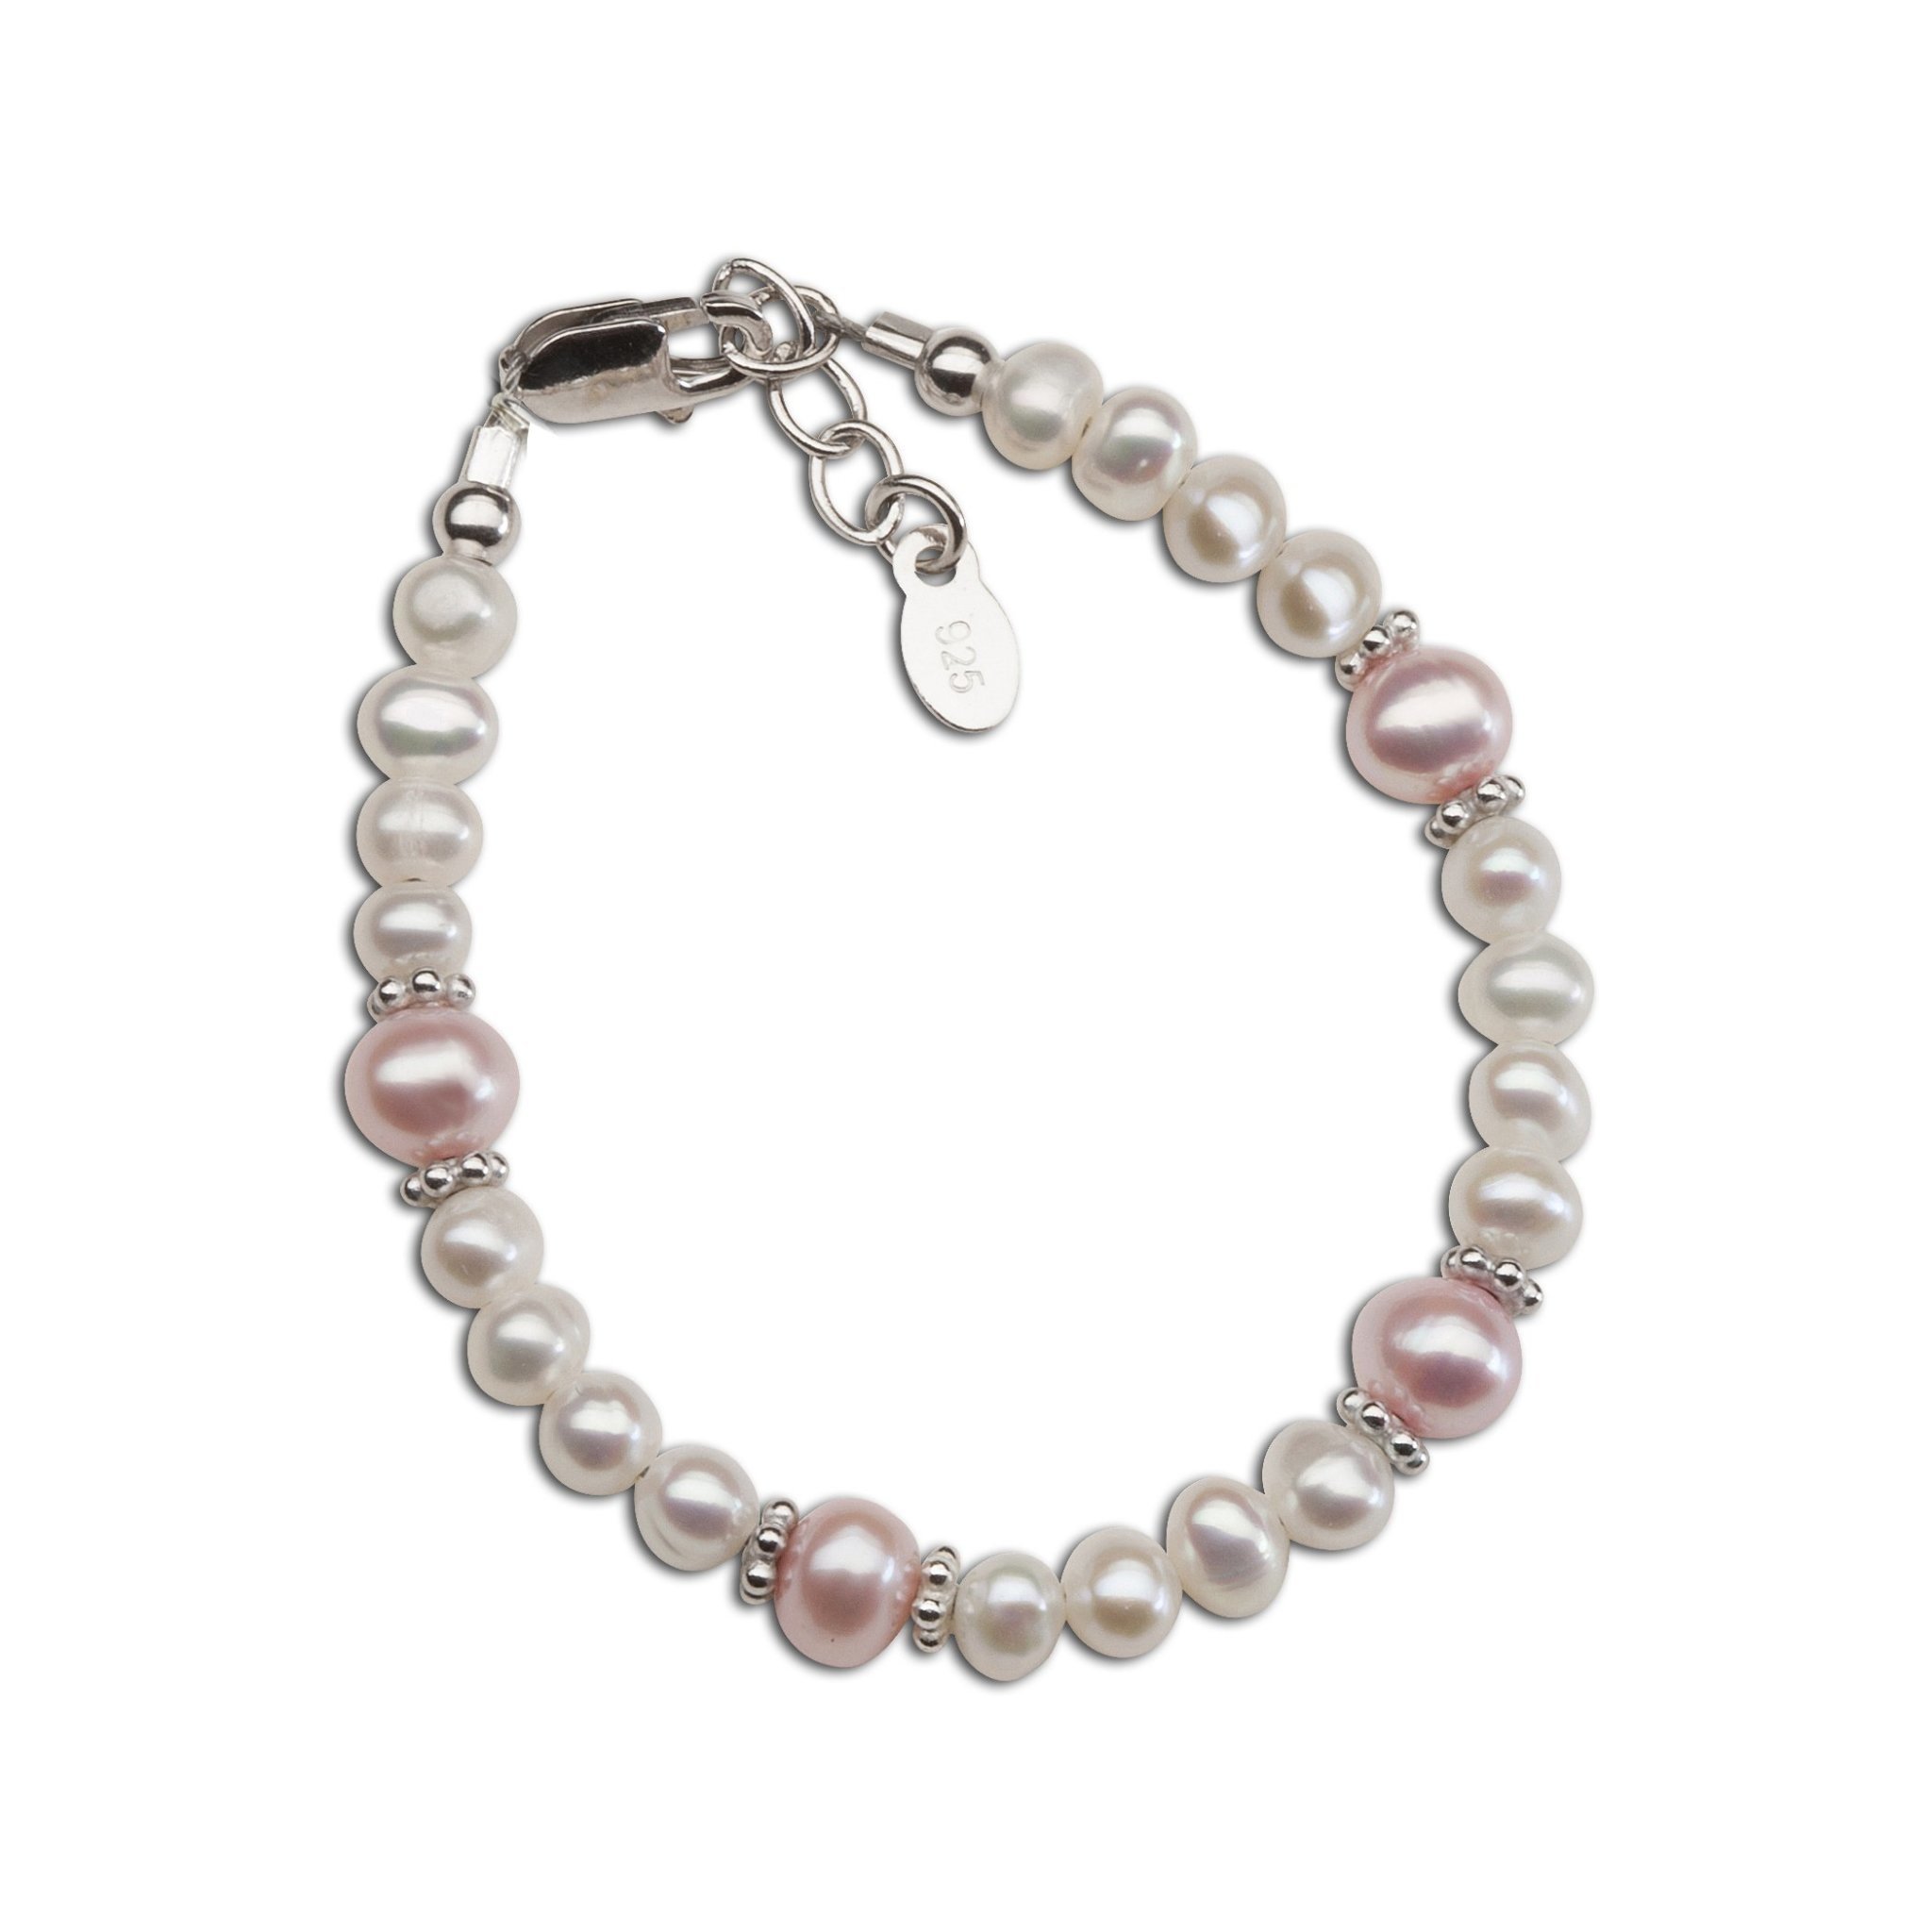 Addie Bracelet - Silver with Pink & White Freshwater Pearls